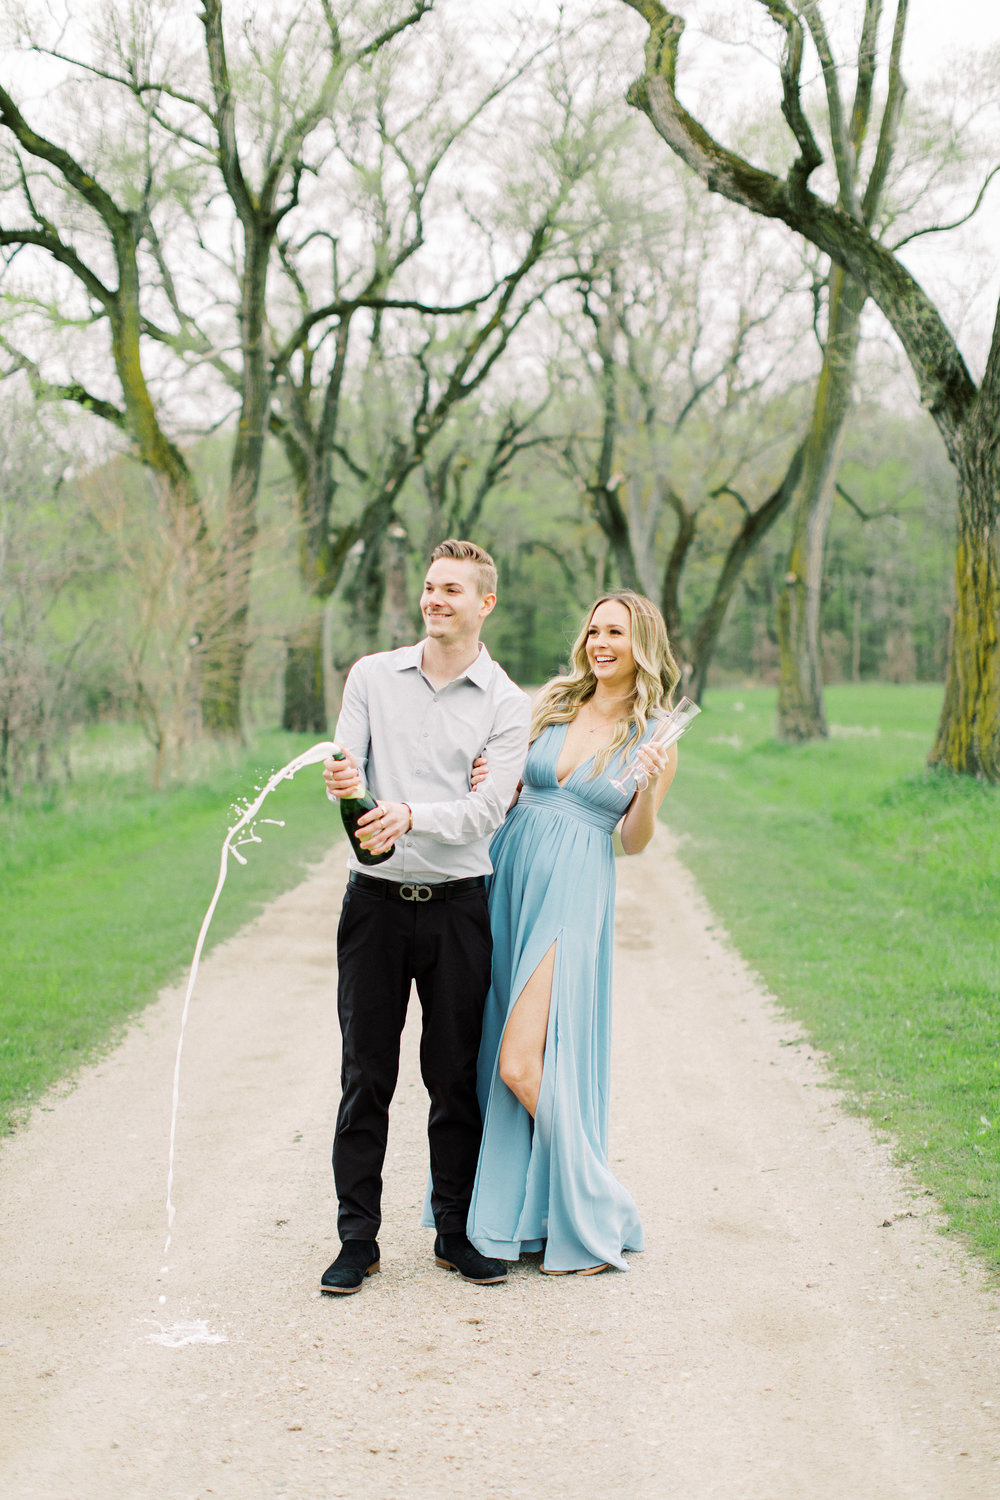 Detroit Engagement session | countryside Engagement | champagne toast